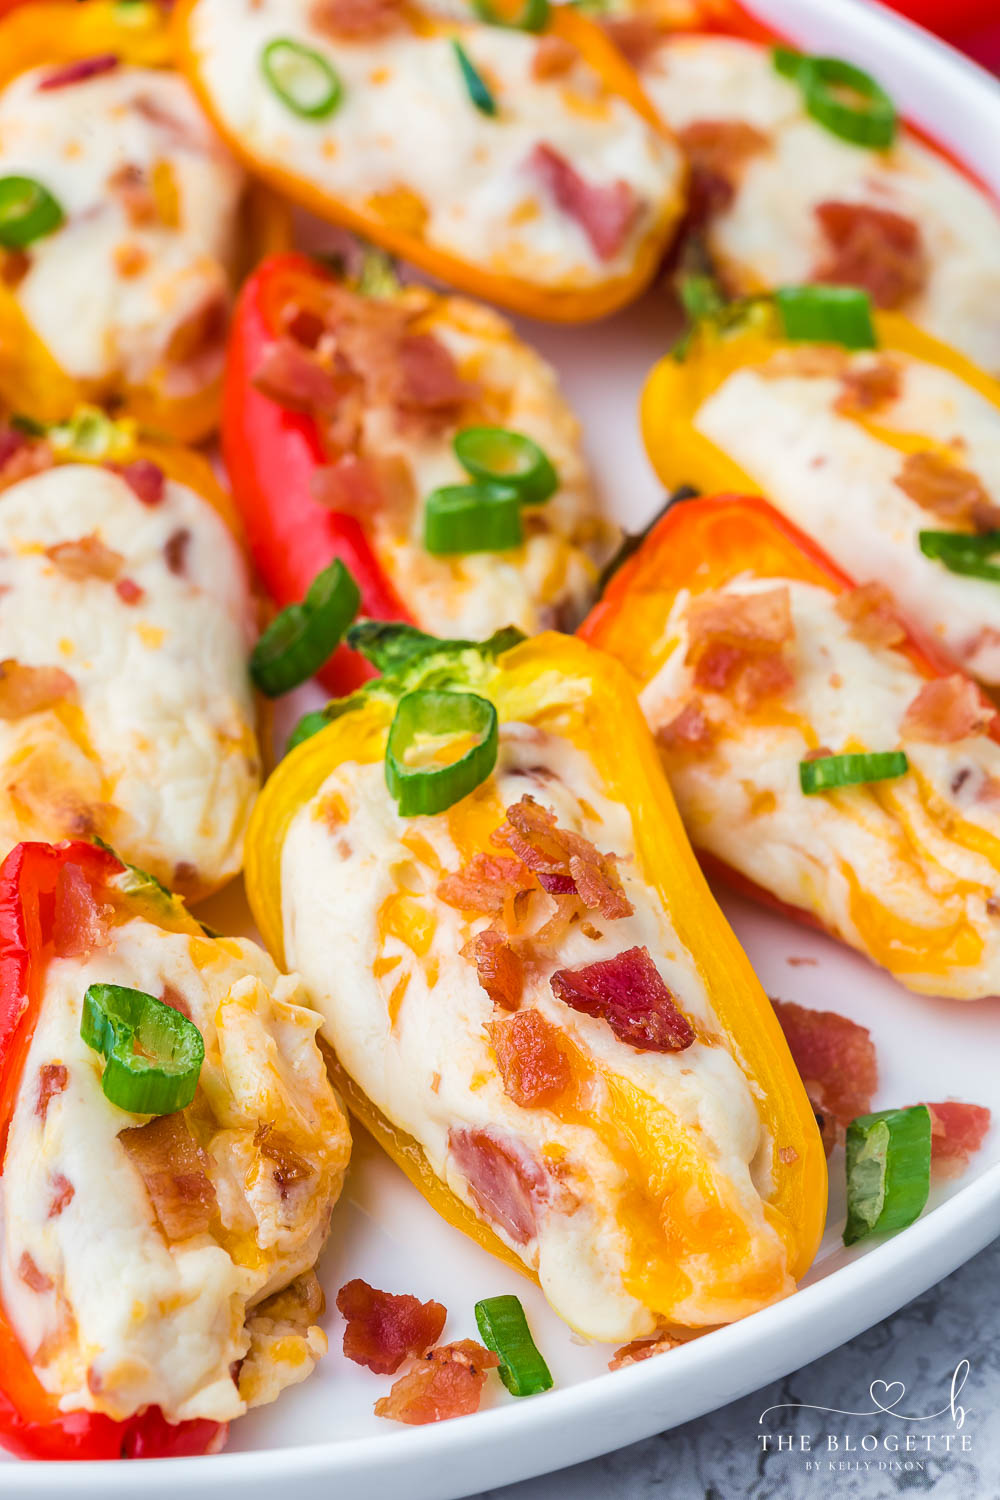 Cheesy Bacon Stuffed Mini Peppers! An easy appetizer idea for any gathering! Sweet mini peppers overflowing with cheese, bacon, and more!